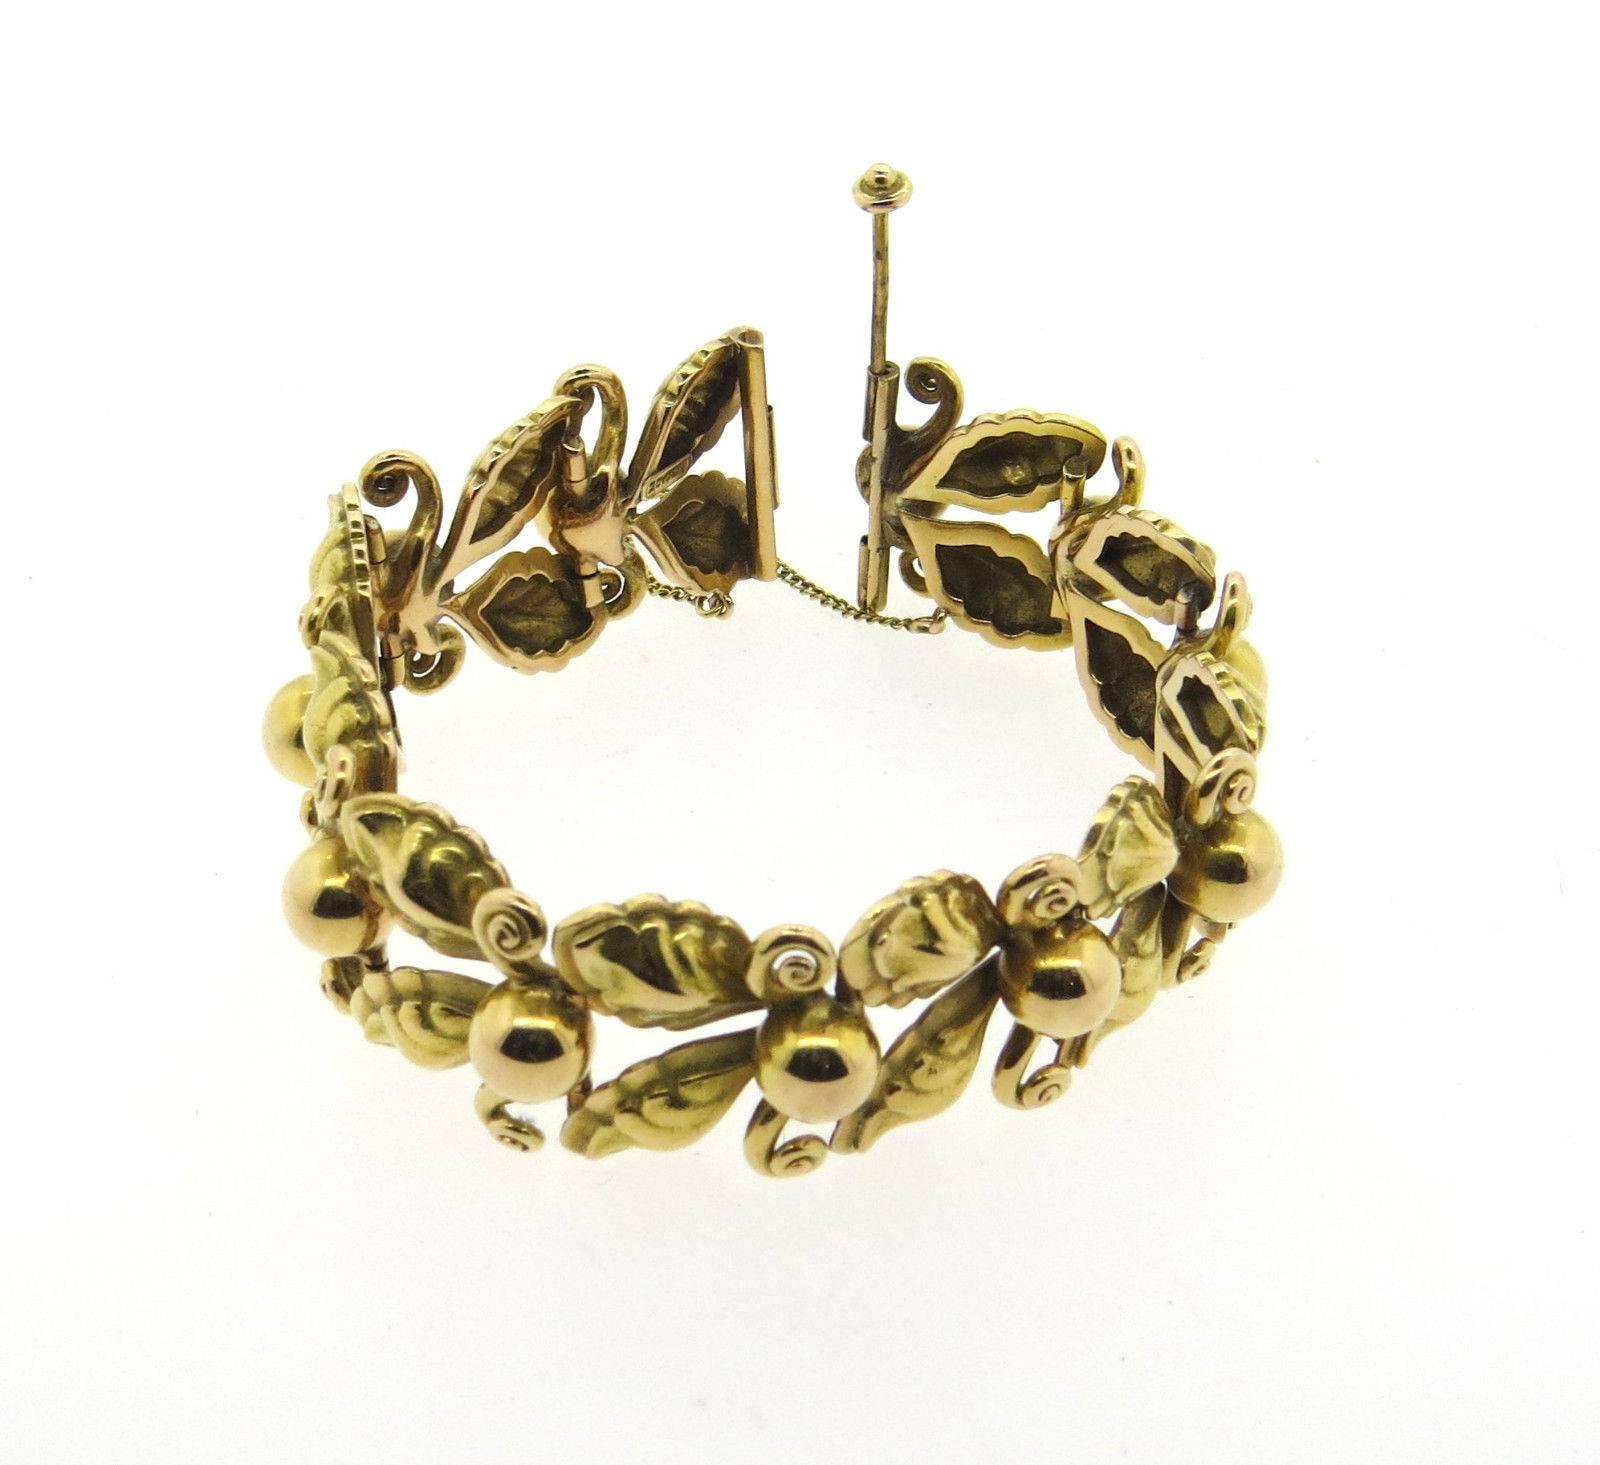 An 18k yellow and rose gold bracelet.  Crafted in the 1930s, the bracelet is 7